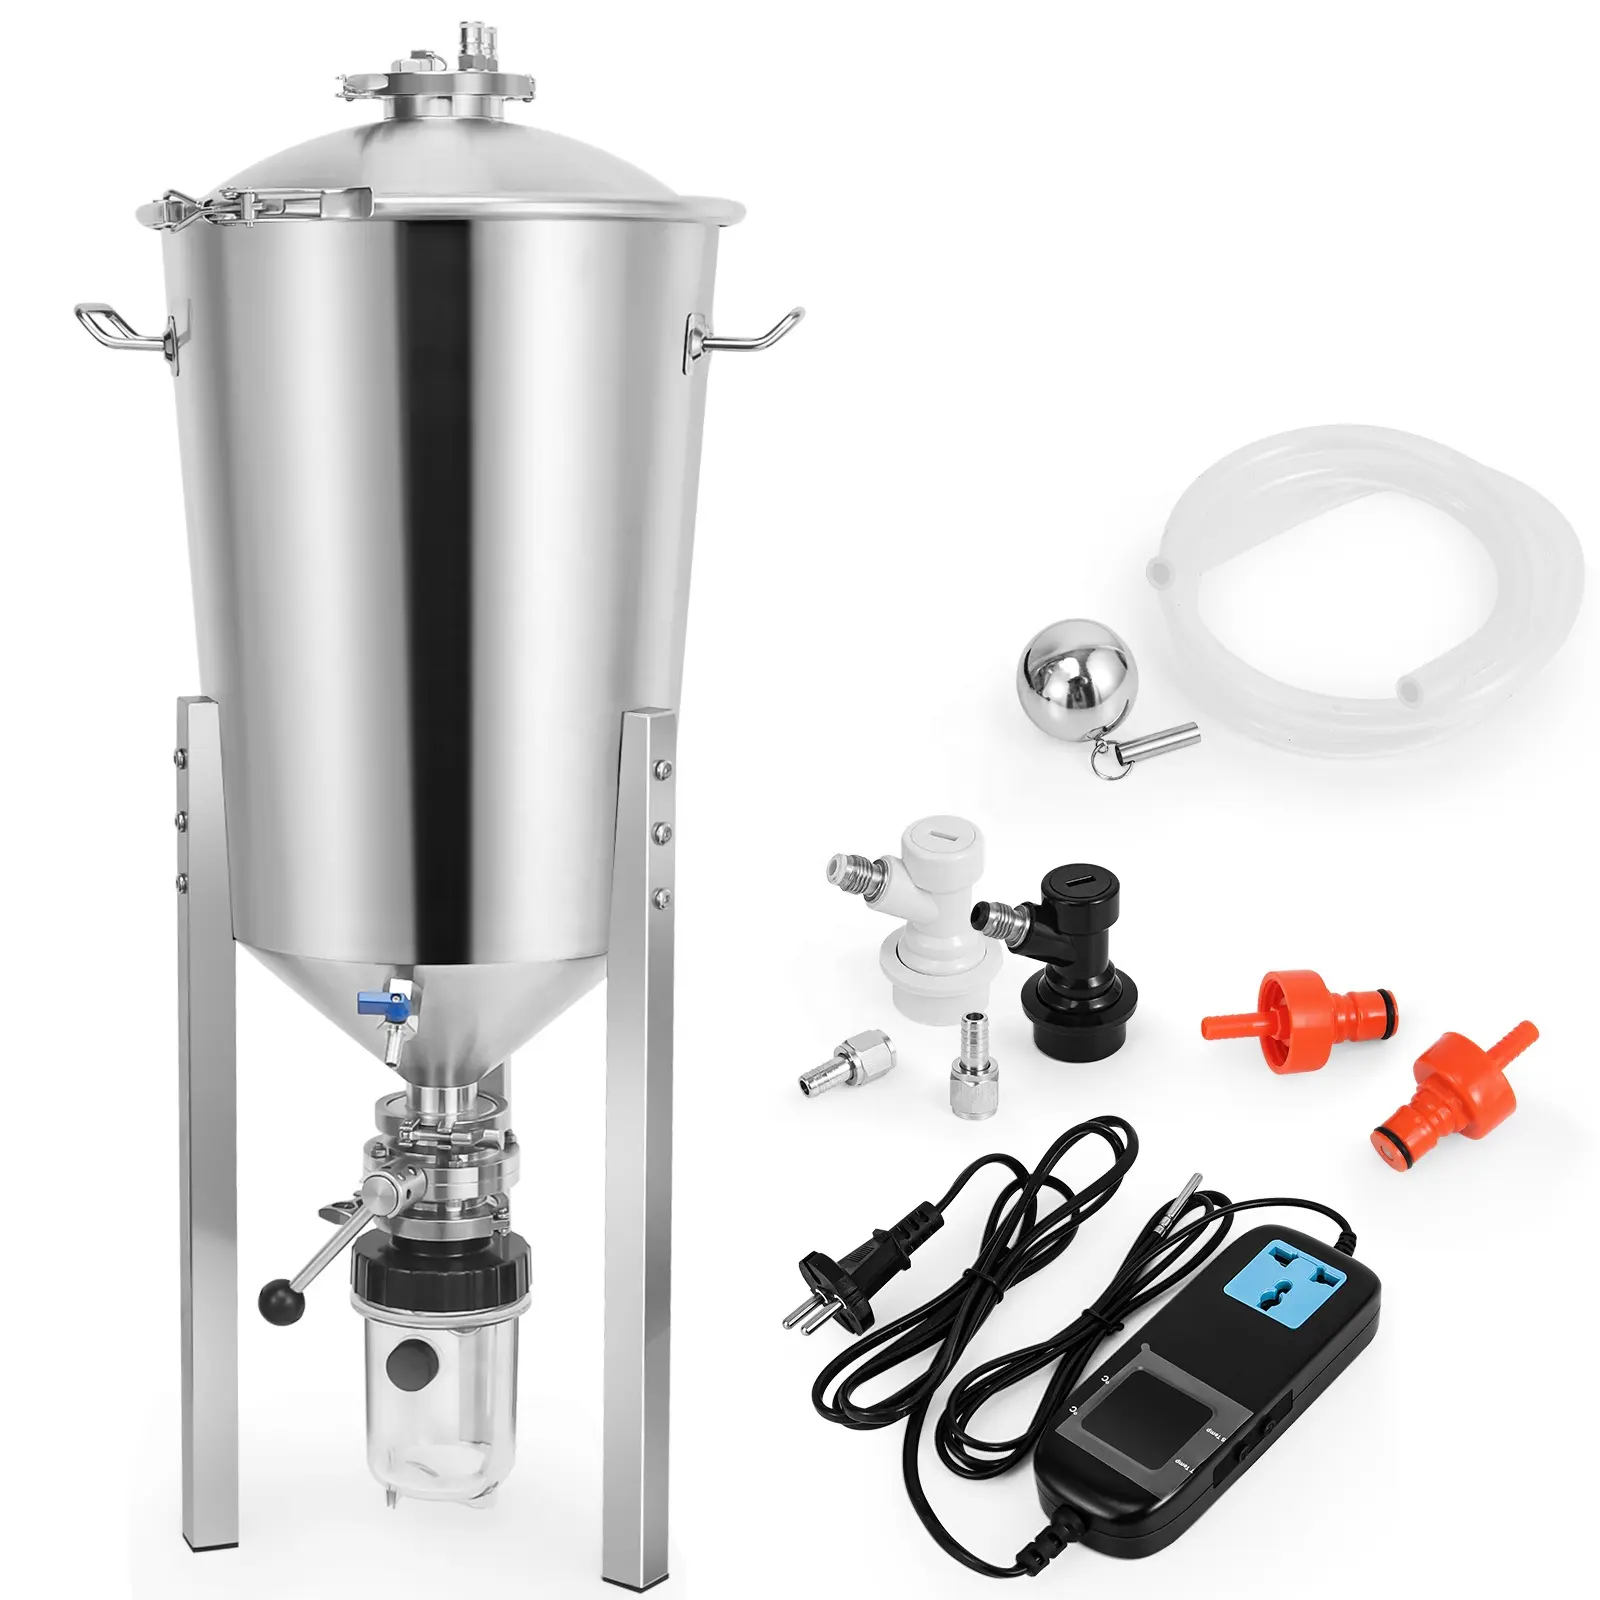 40L 60L Pressurized Fermenter Stainless Steel 304 Concial Fermentation Tank for Beer Brewing Equipments